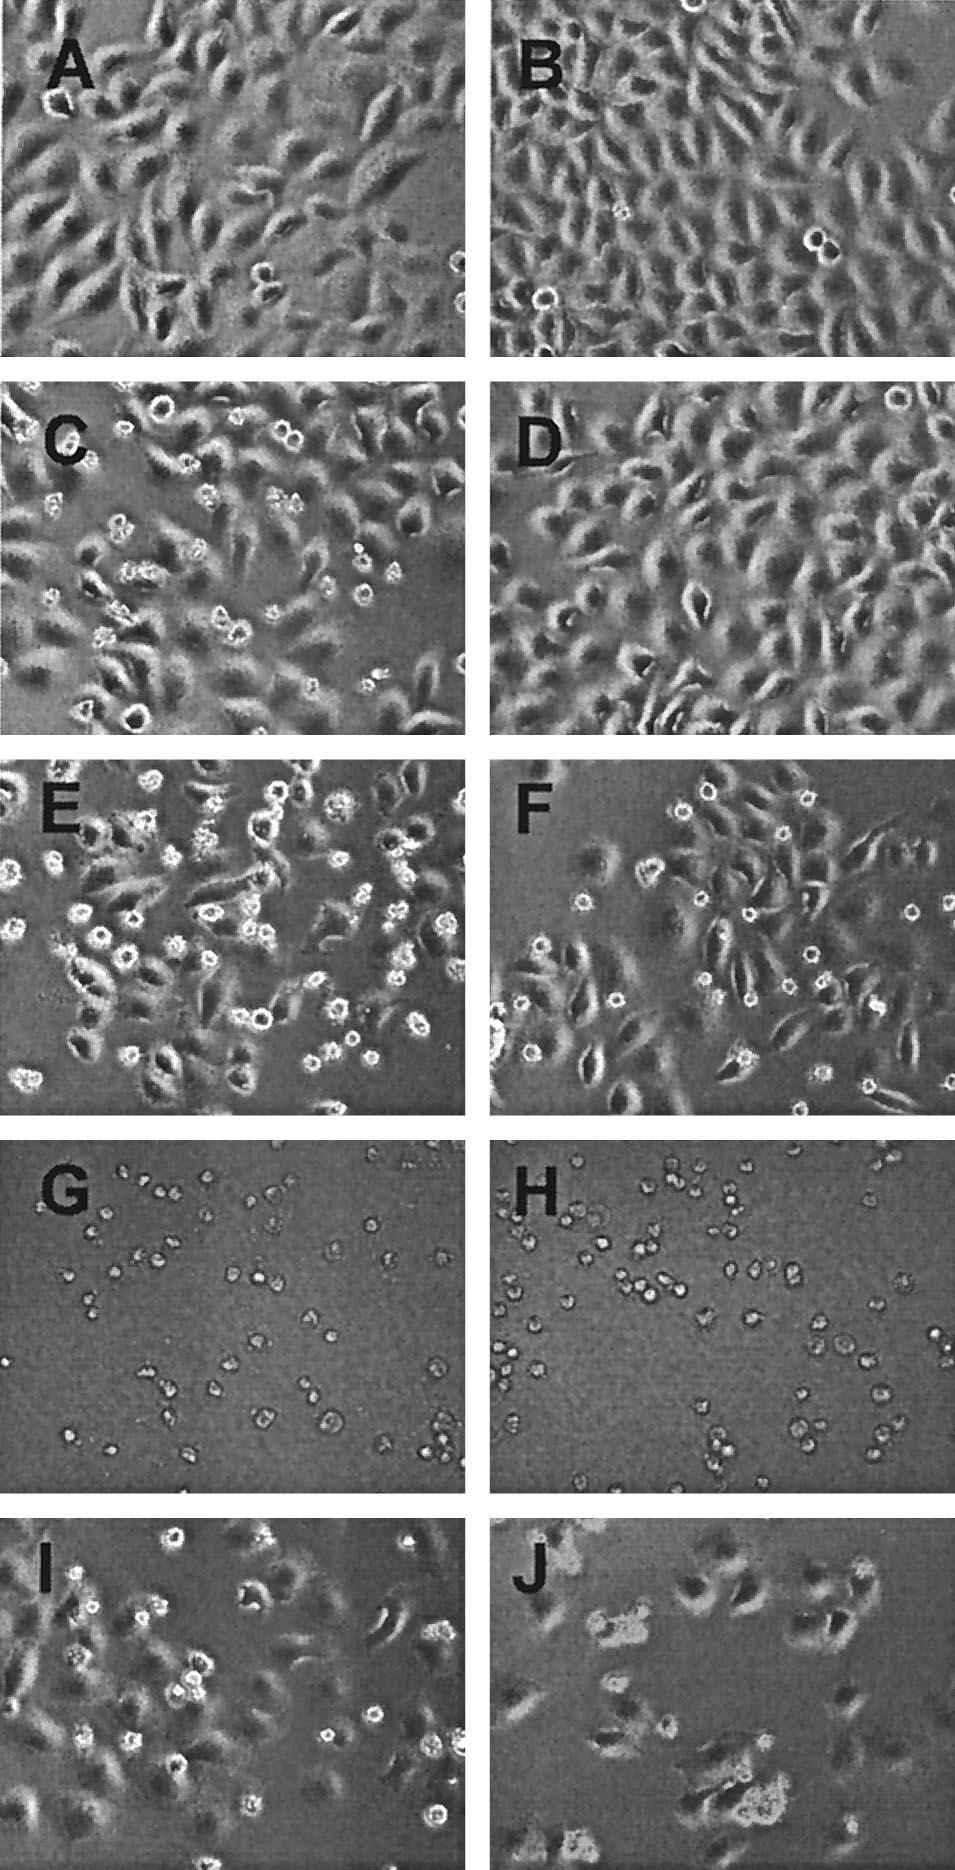 4666 KOPECKY AND LYLES J. VIROL. FIG. 7. Images of cells transfected with M mrna or treated with inhibitors of host gene expression in the presence of a caspase-8 inhibitor.